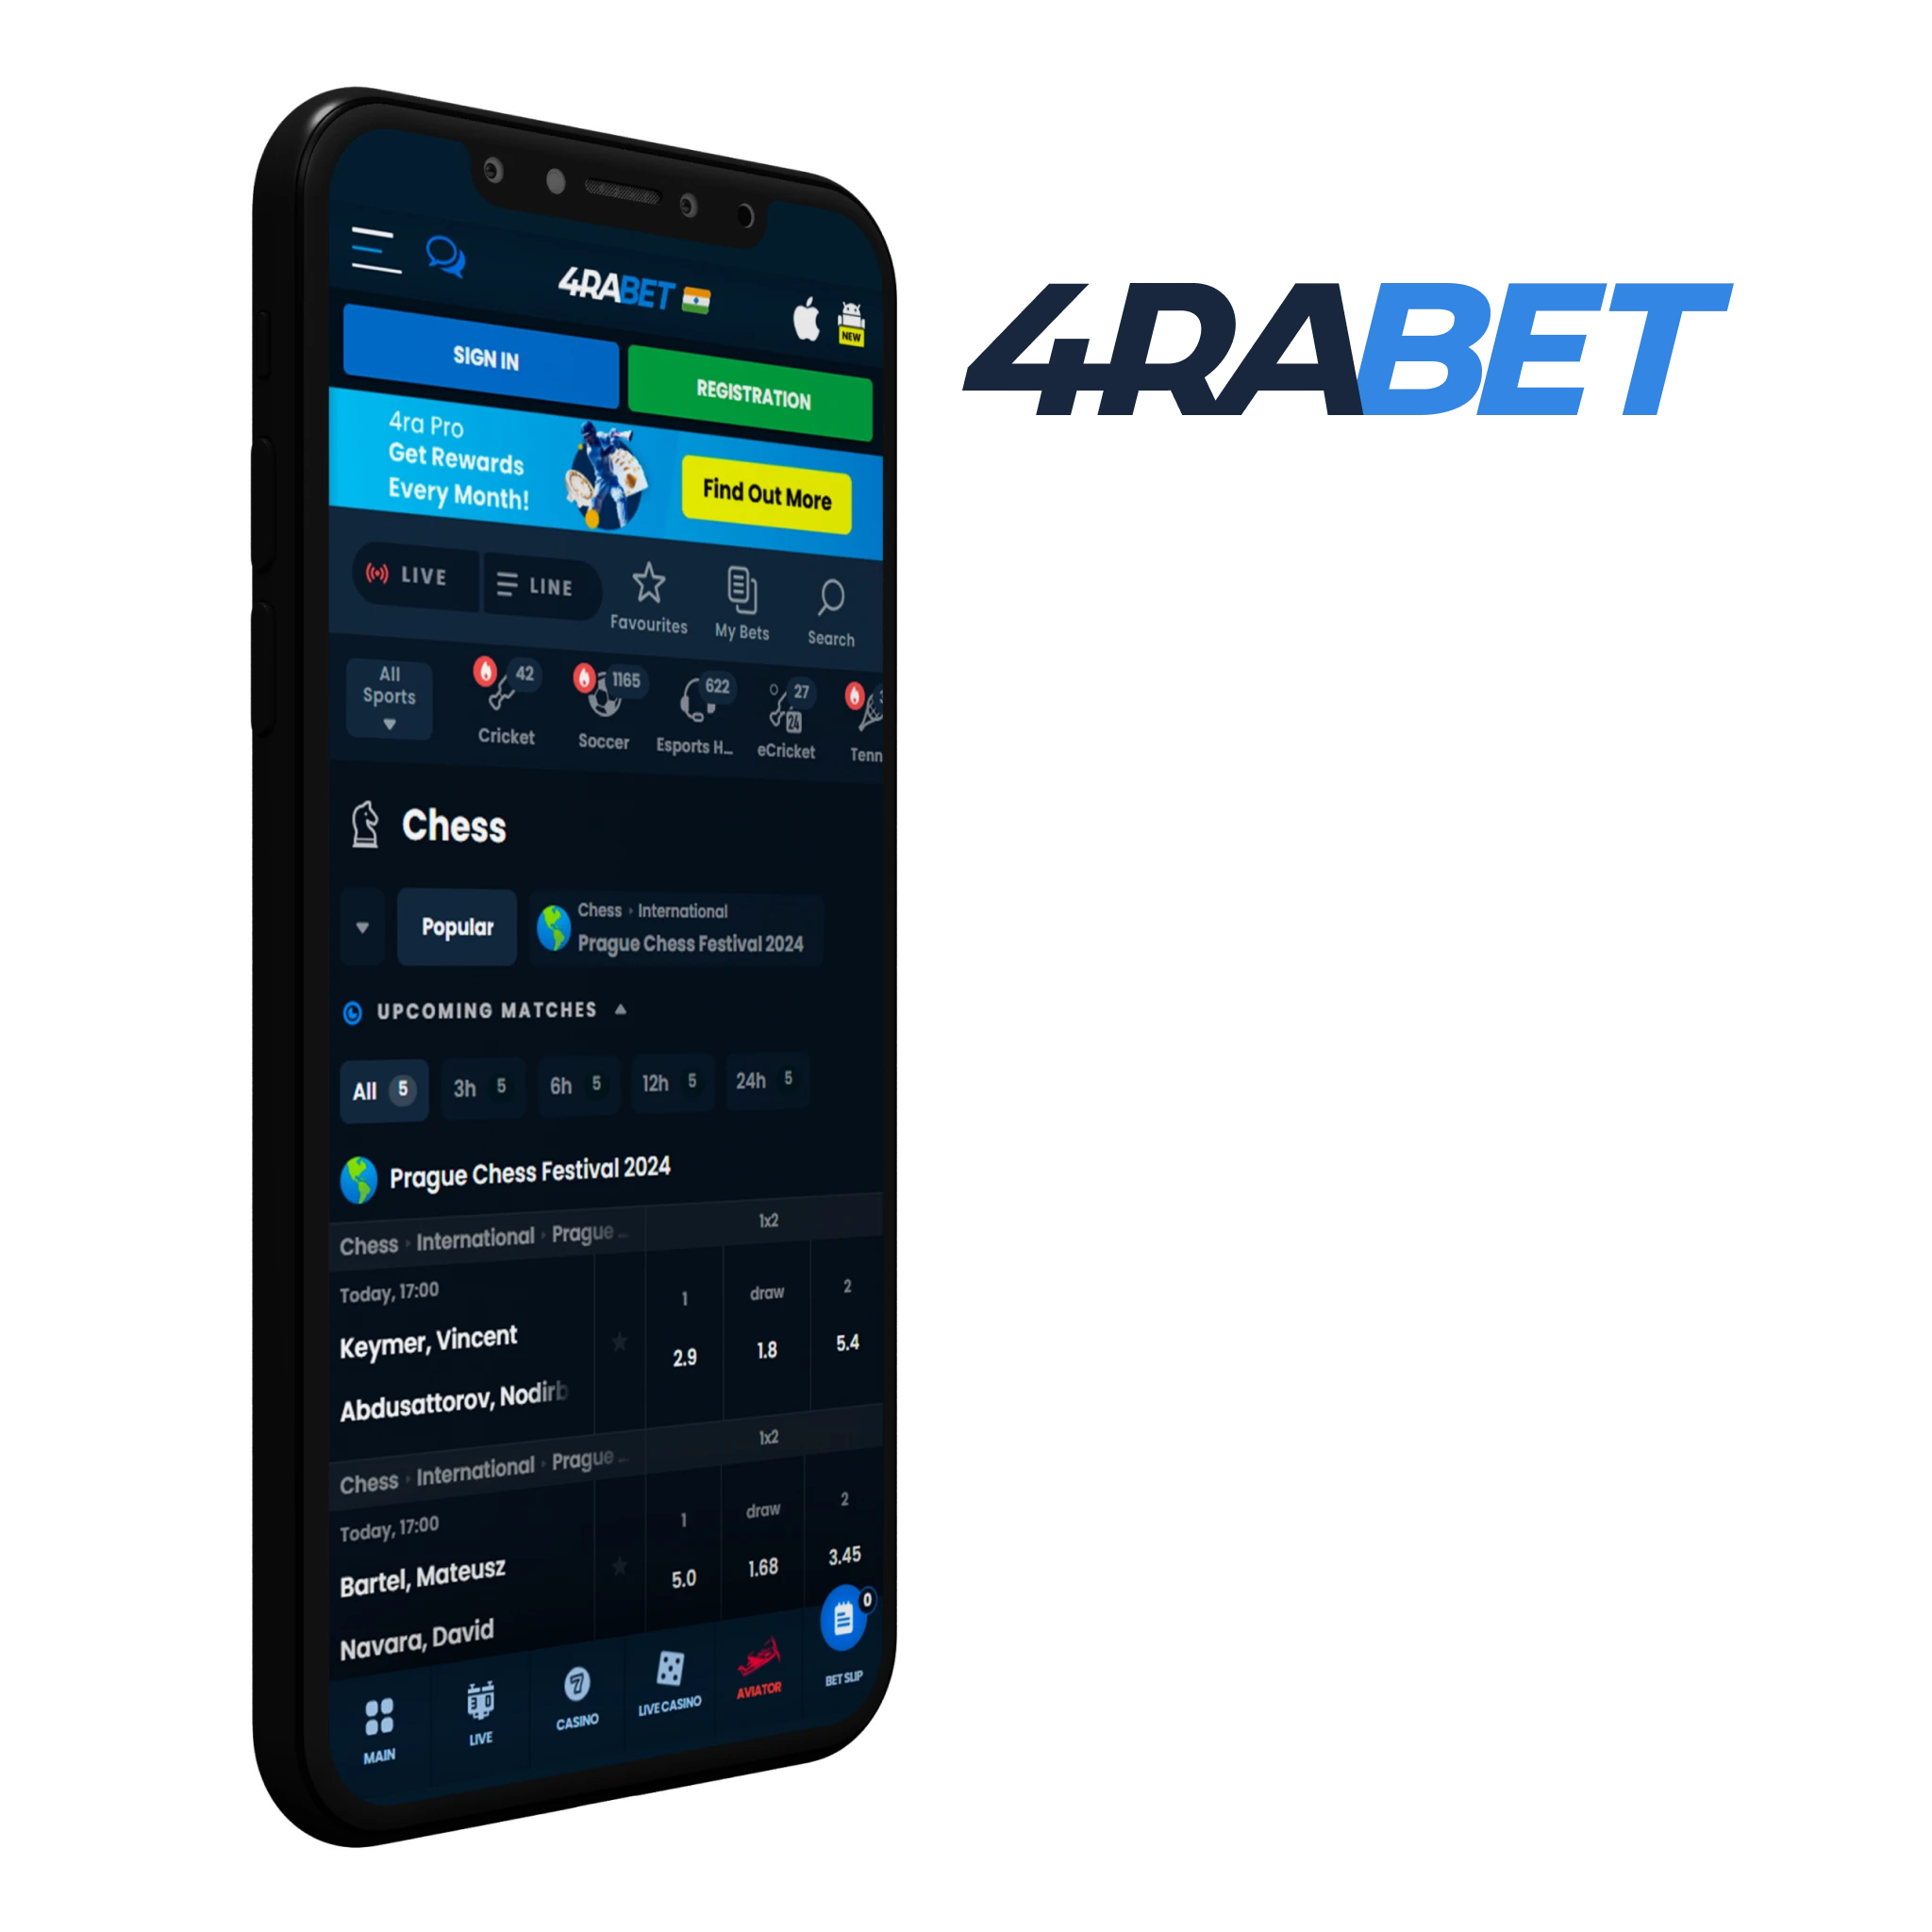 4rabet app provides a conducive environment for chess betting devotees.